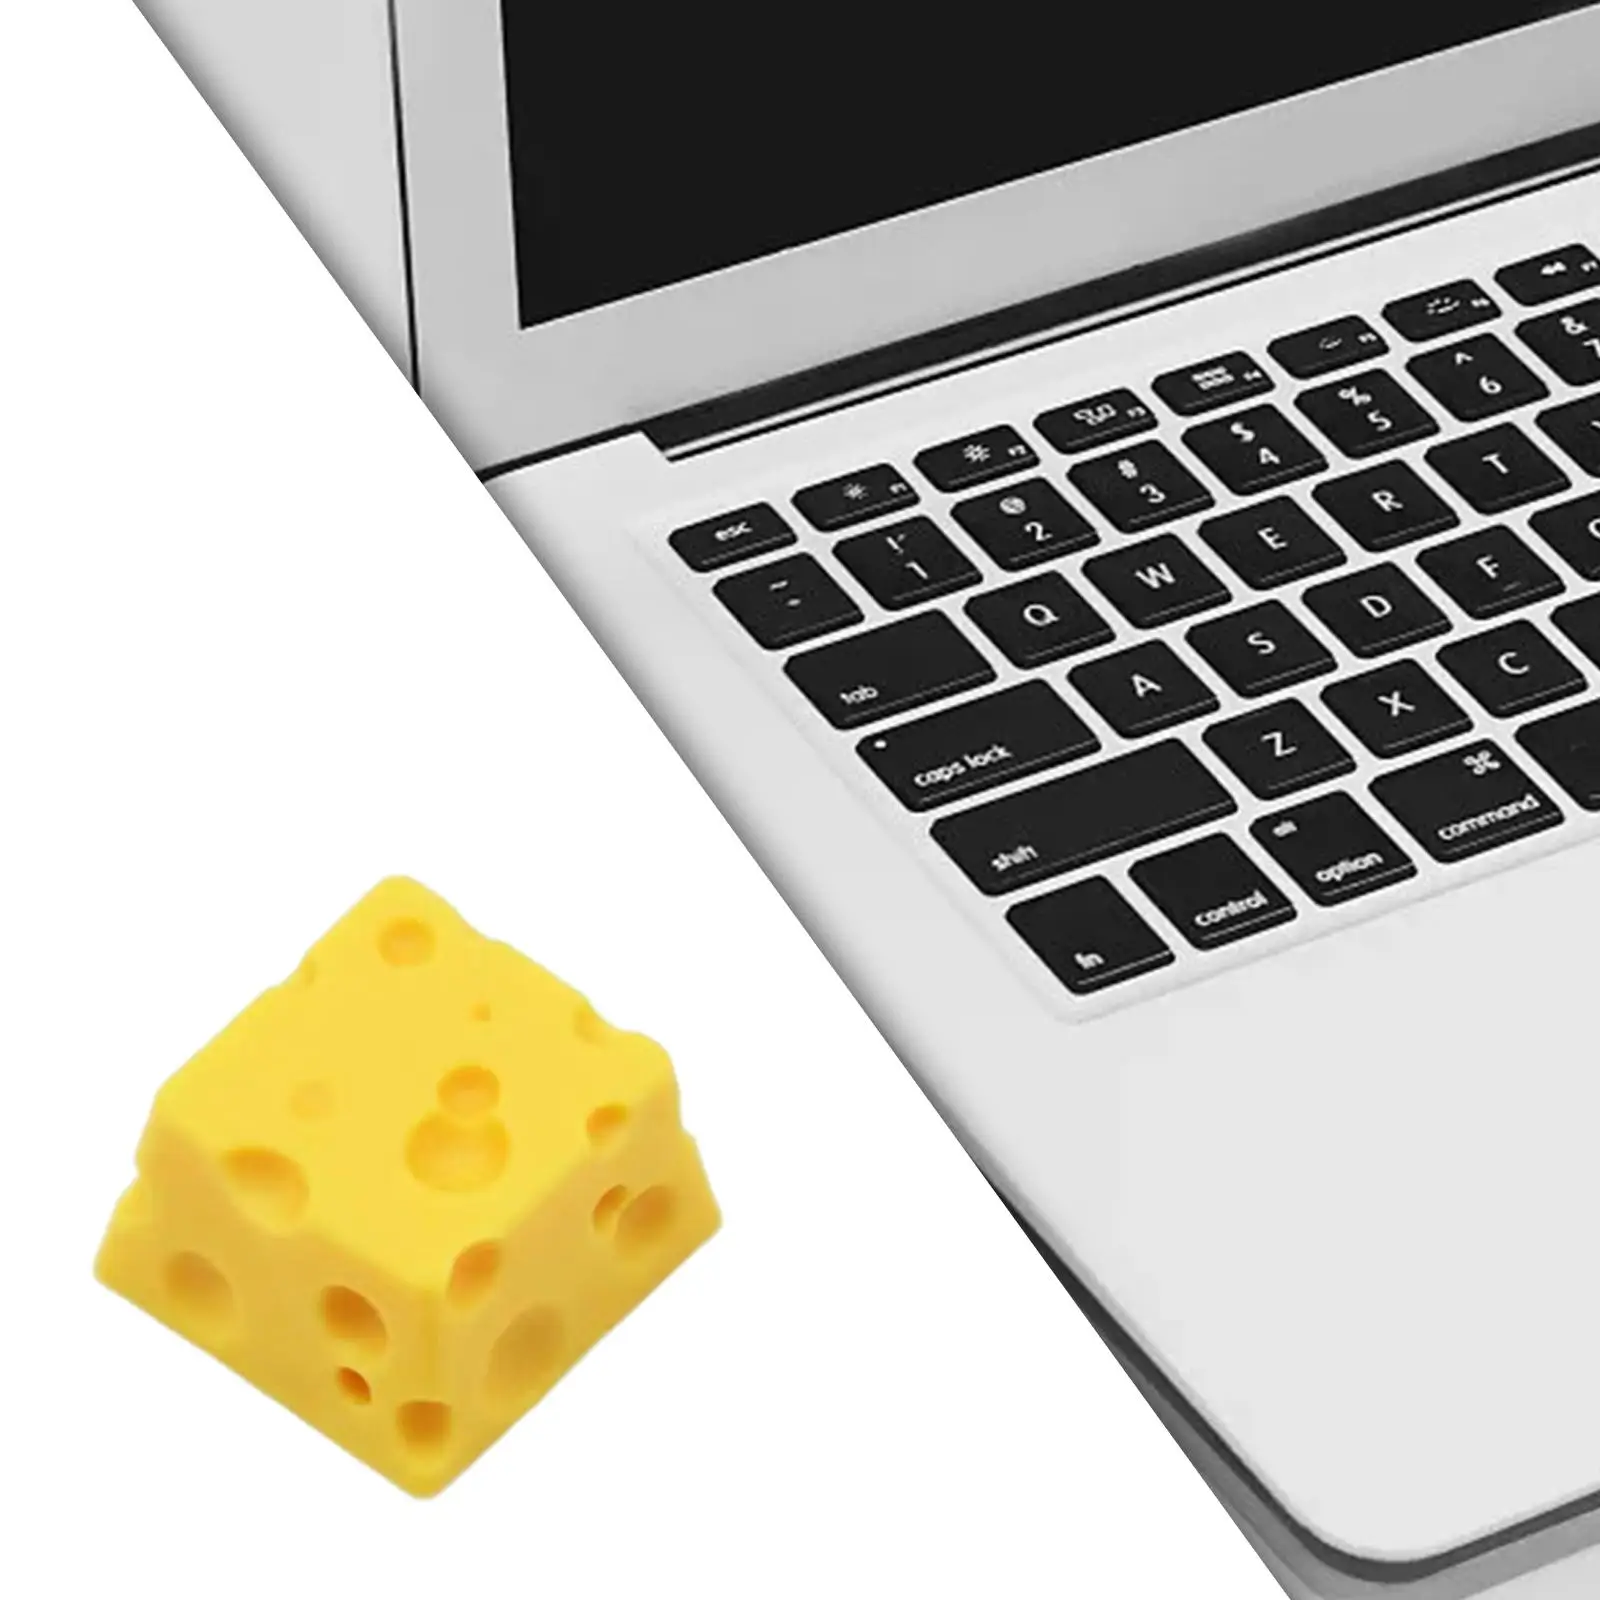 Cheese Keycap Exquisite Cute Keycap Cheese Style Handmade Customized Cheese Cake Key Caps Resin Keycap for Mechanical Keyboard